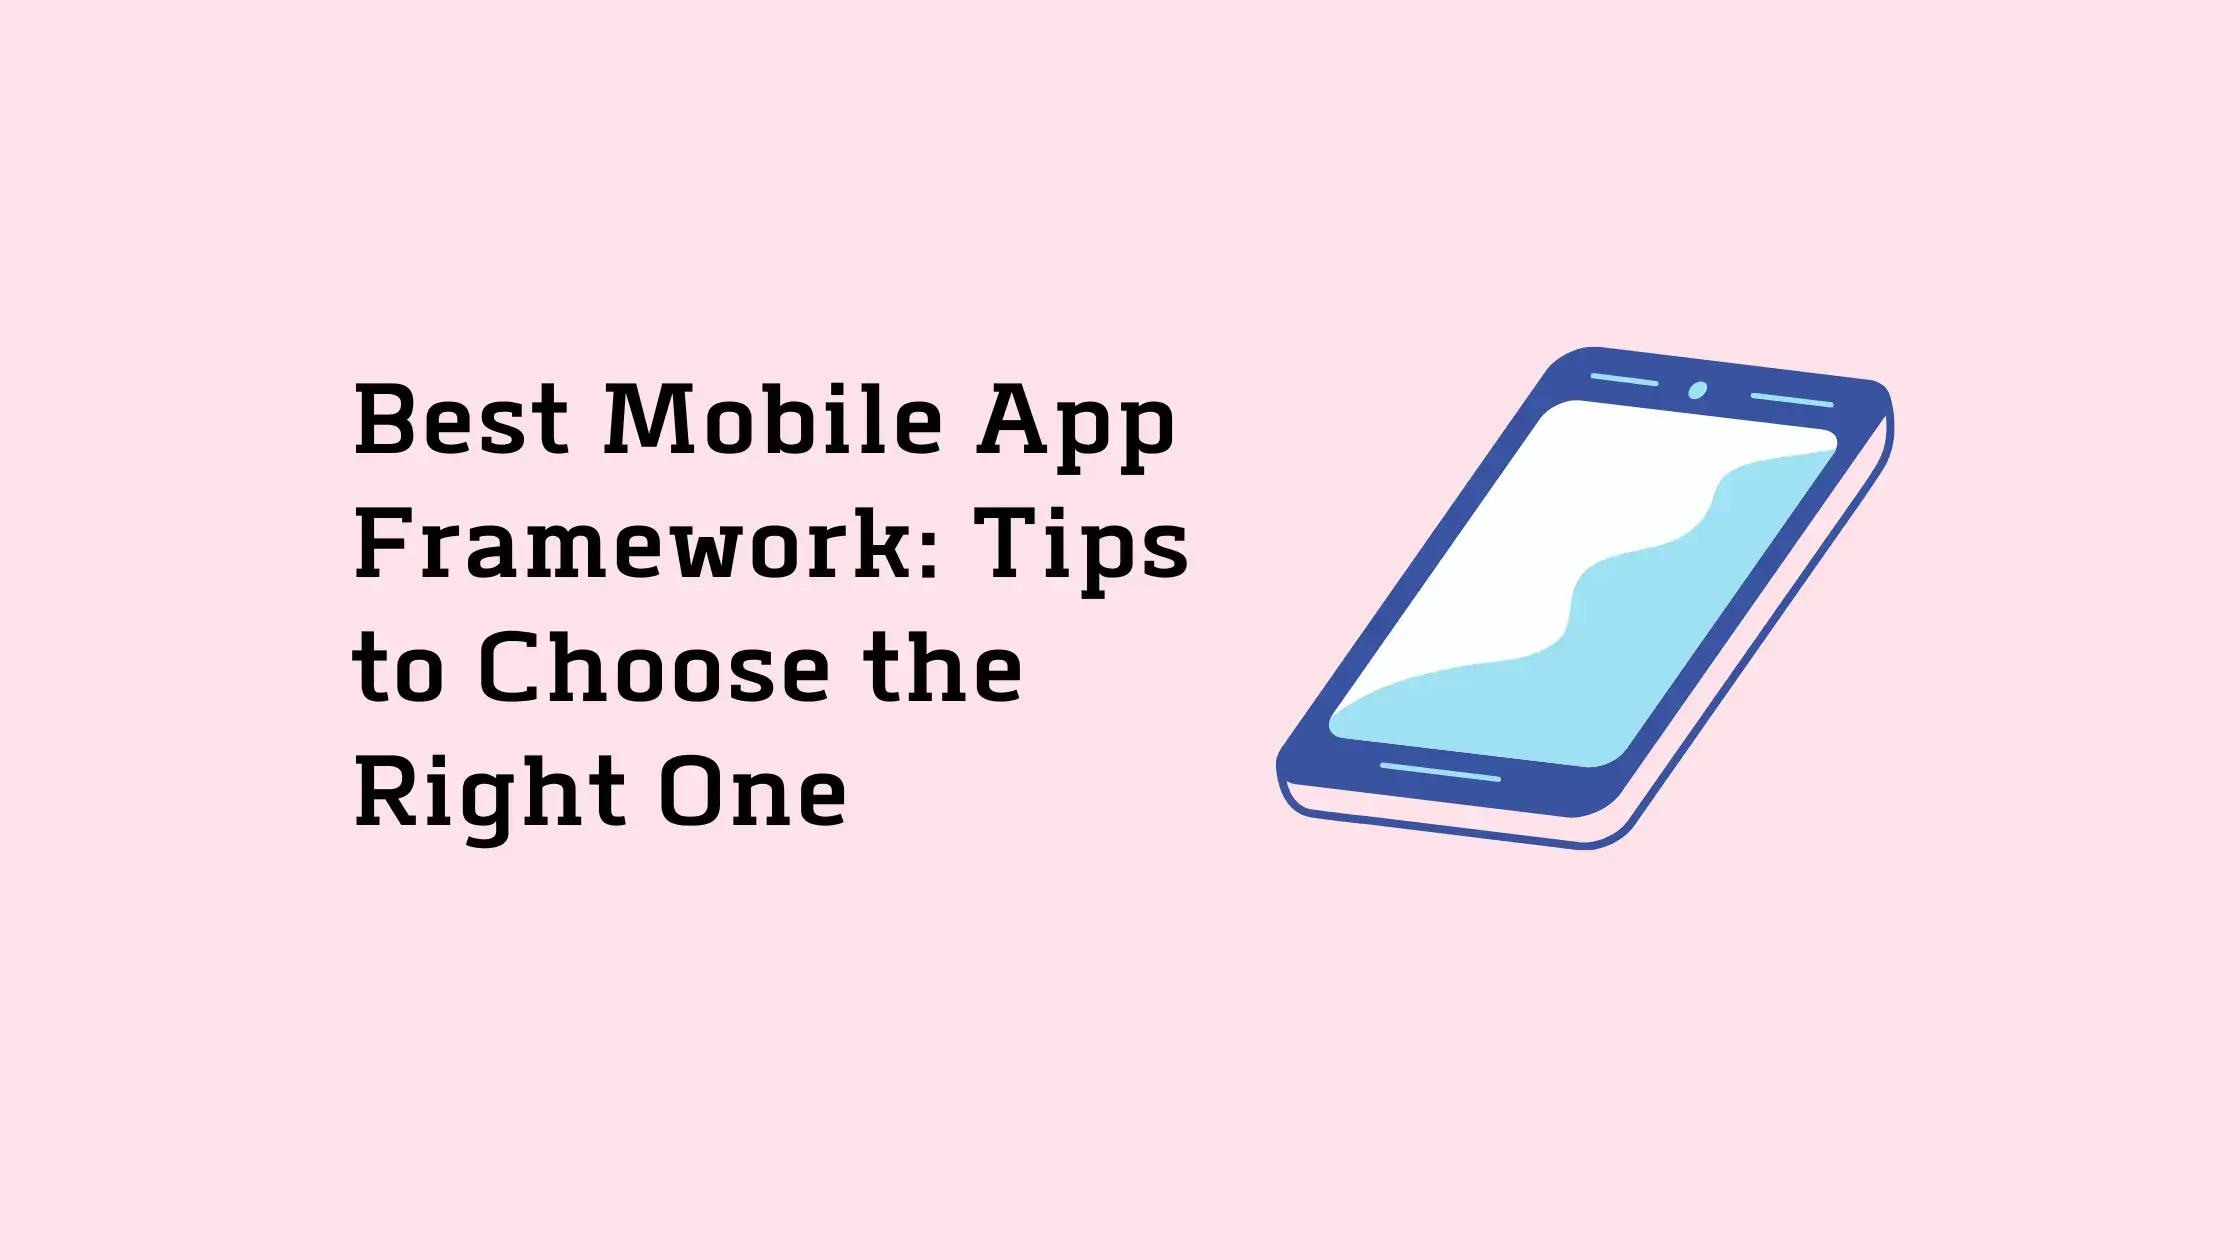 Best-Mobile-App-Framework-Tips-to-Choose-the-Right-One